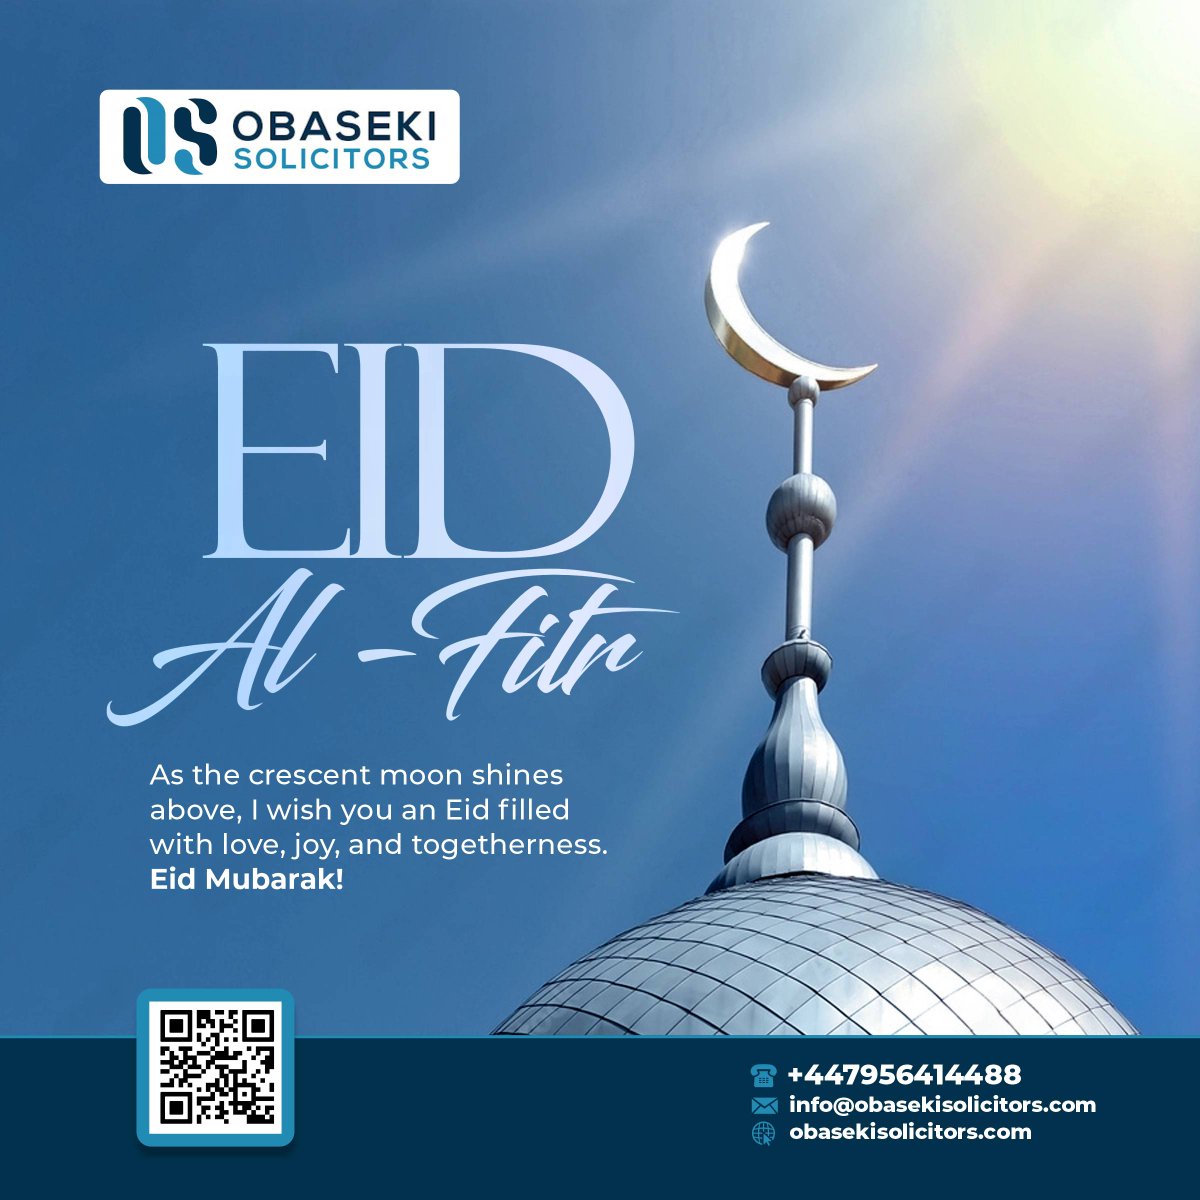 As the moon shines above, we wish you an Eid filled with love, joy, and togetherness.

Eid Mubarak!

Book a session with us today supplytomydoor.kartra.com/page/pM7198

#ObasekiSolicitors #childlaw #housing #civillitigation #divorce #Conveyancing #landlordandtenant #employment #property